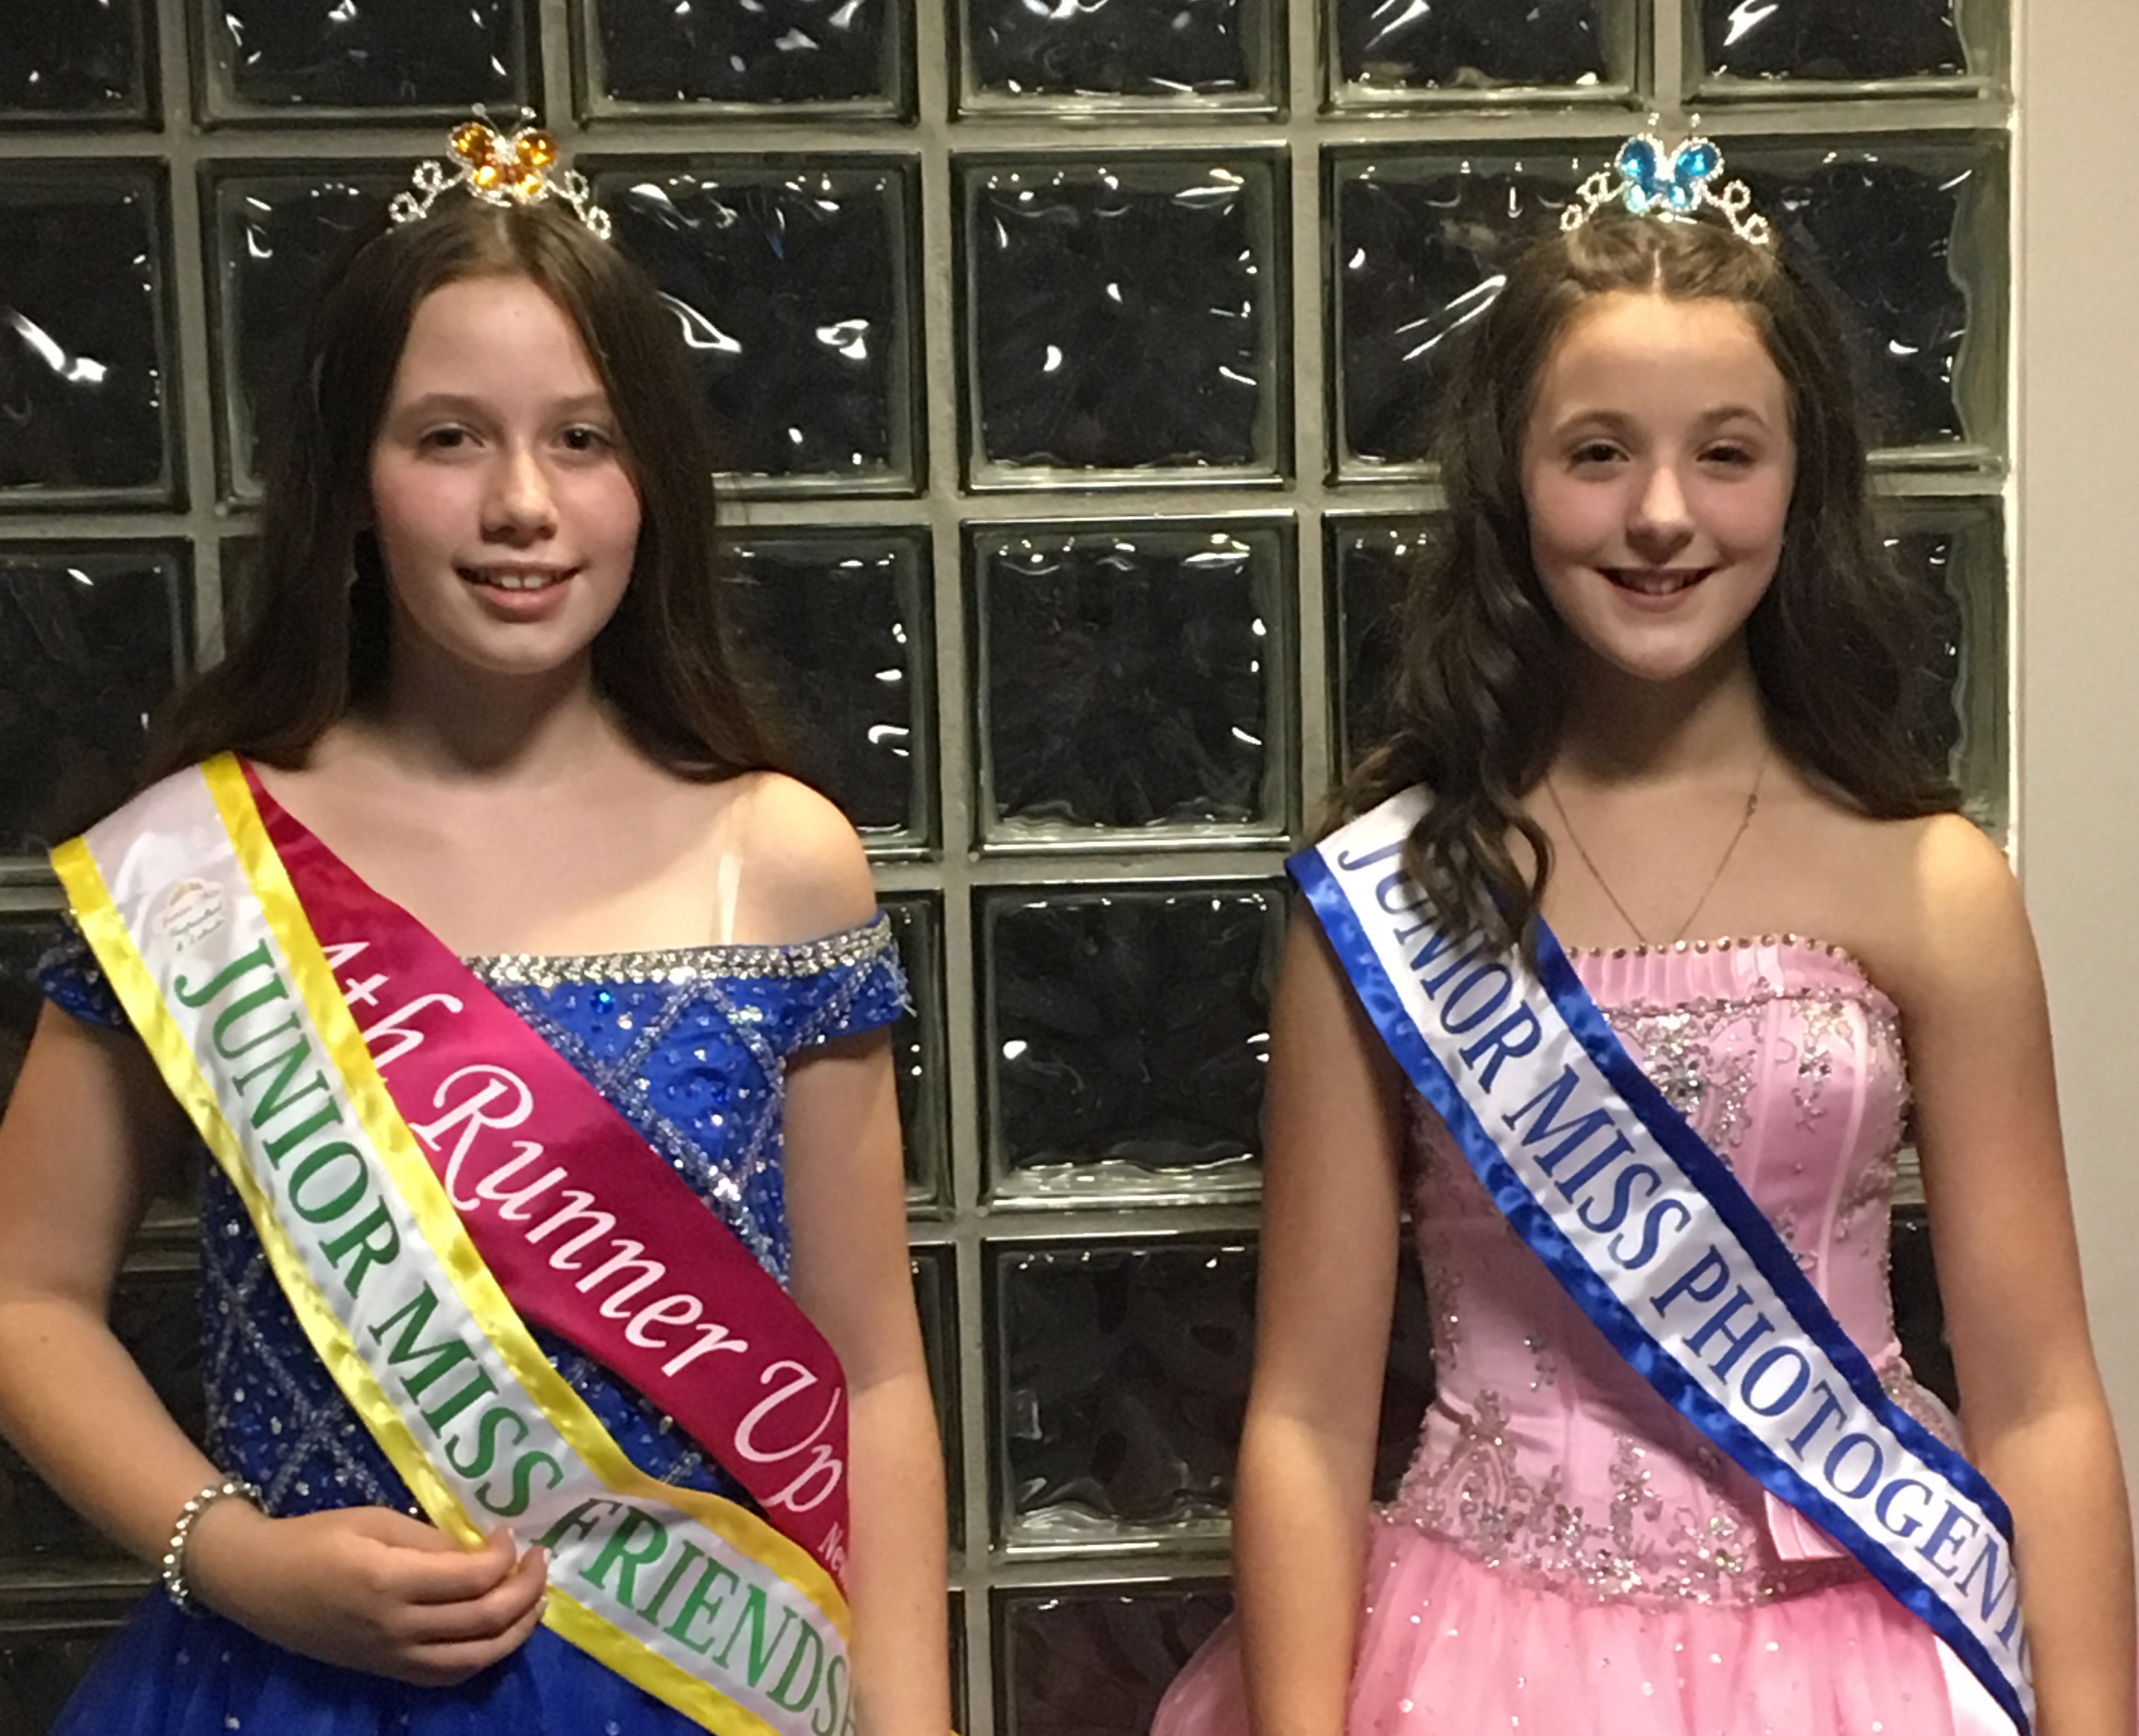 CBS girls take home prizes at Junior Miss Newfoundland pageant - The Shorel...